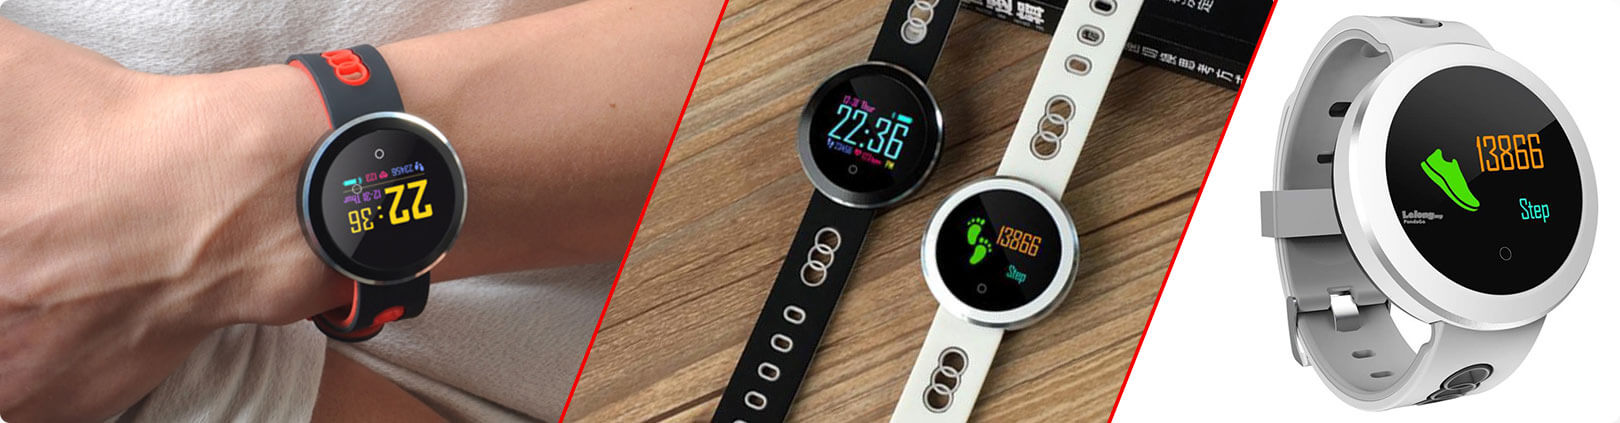 HealthWatch - the new SmartWatch which Monitors Your Vital Function